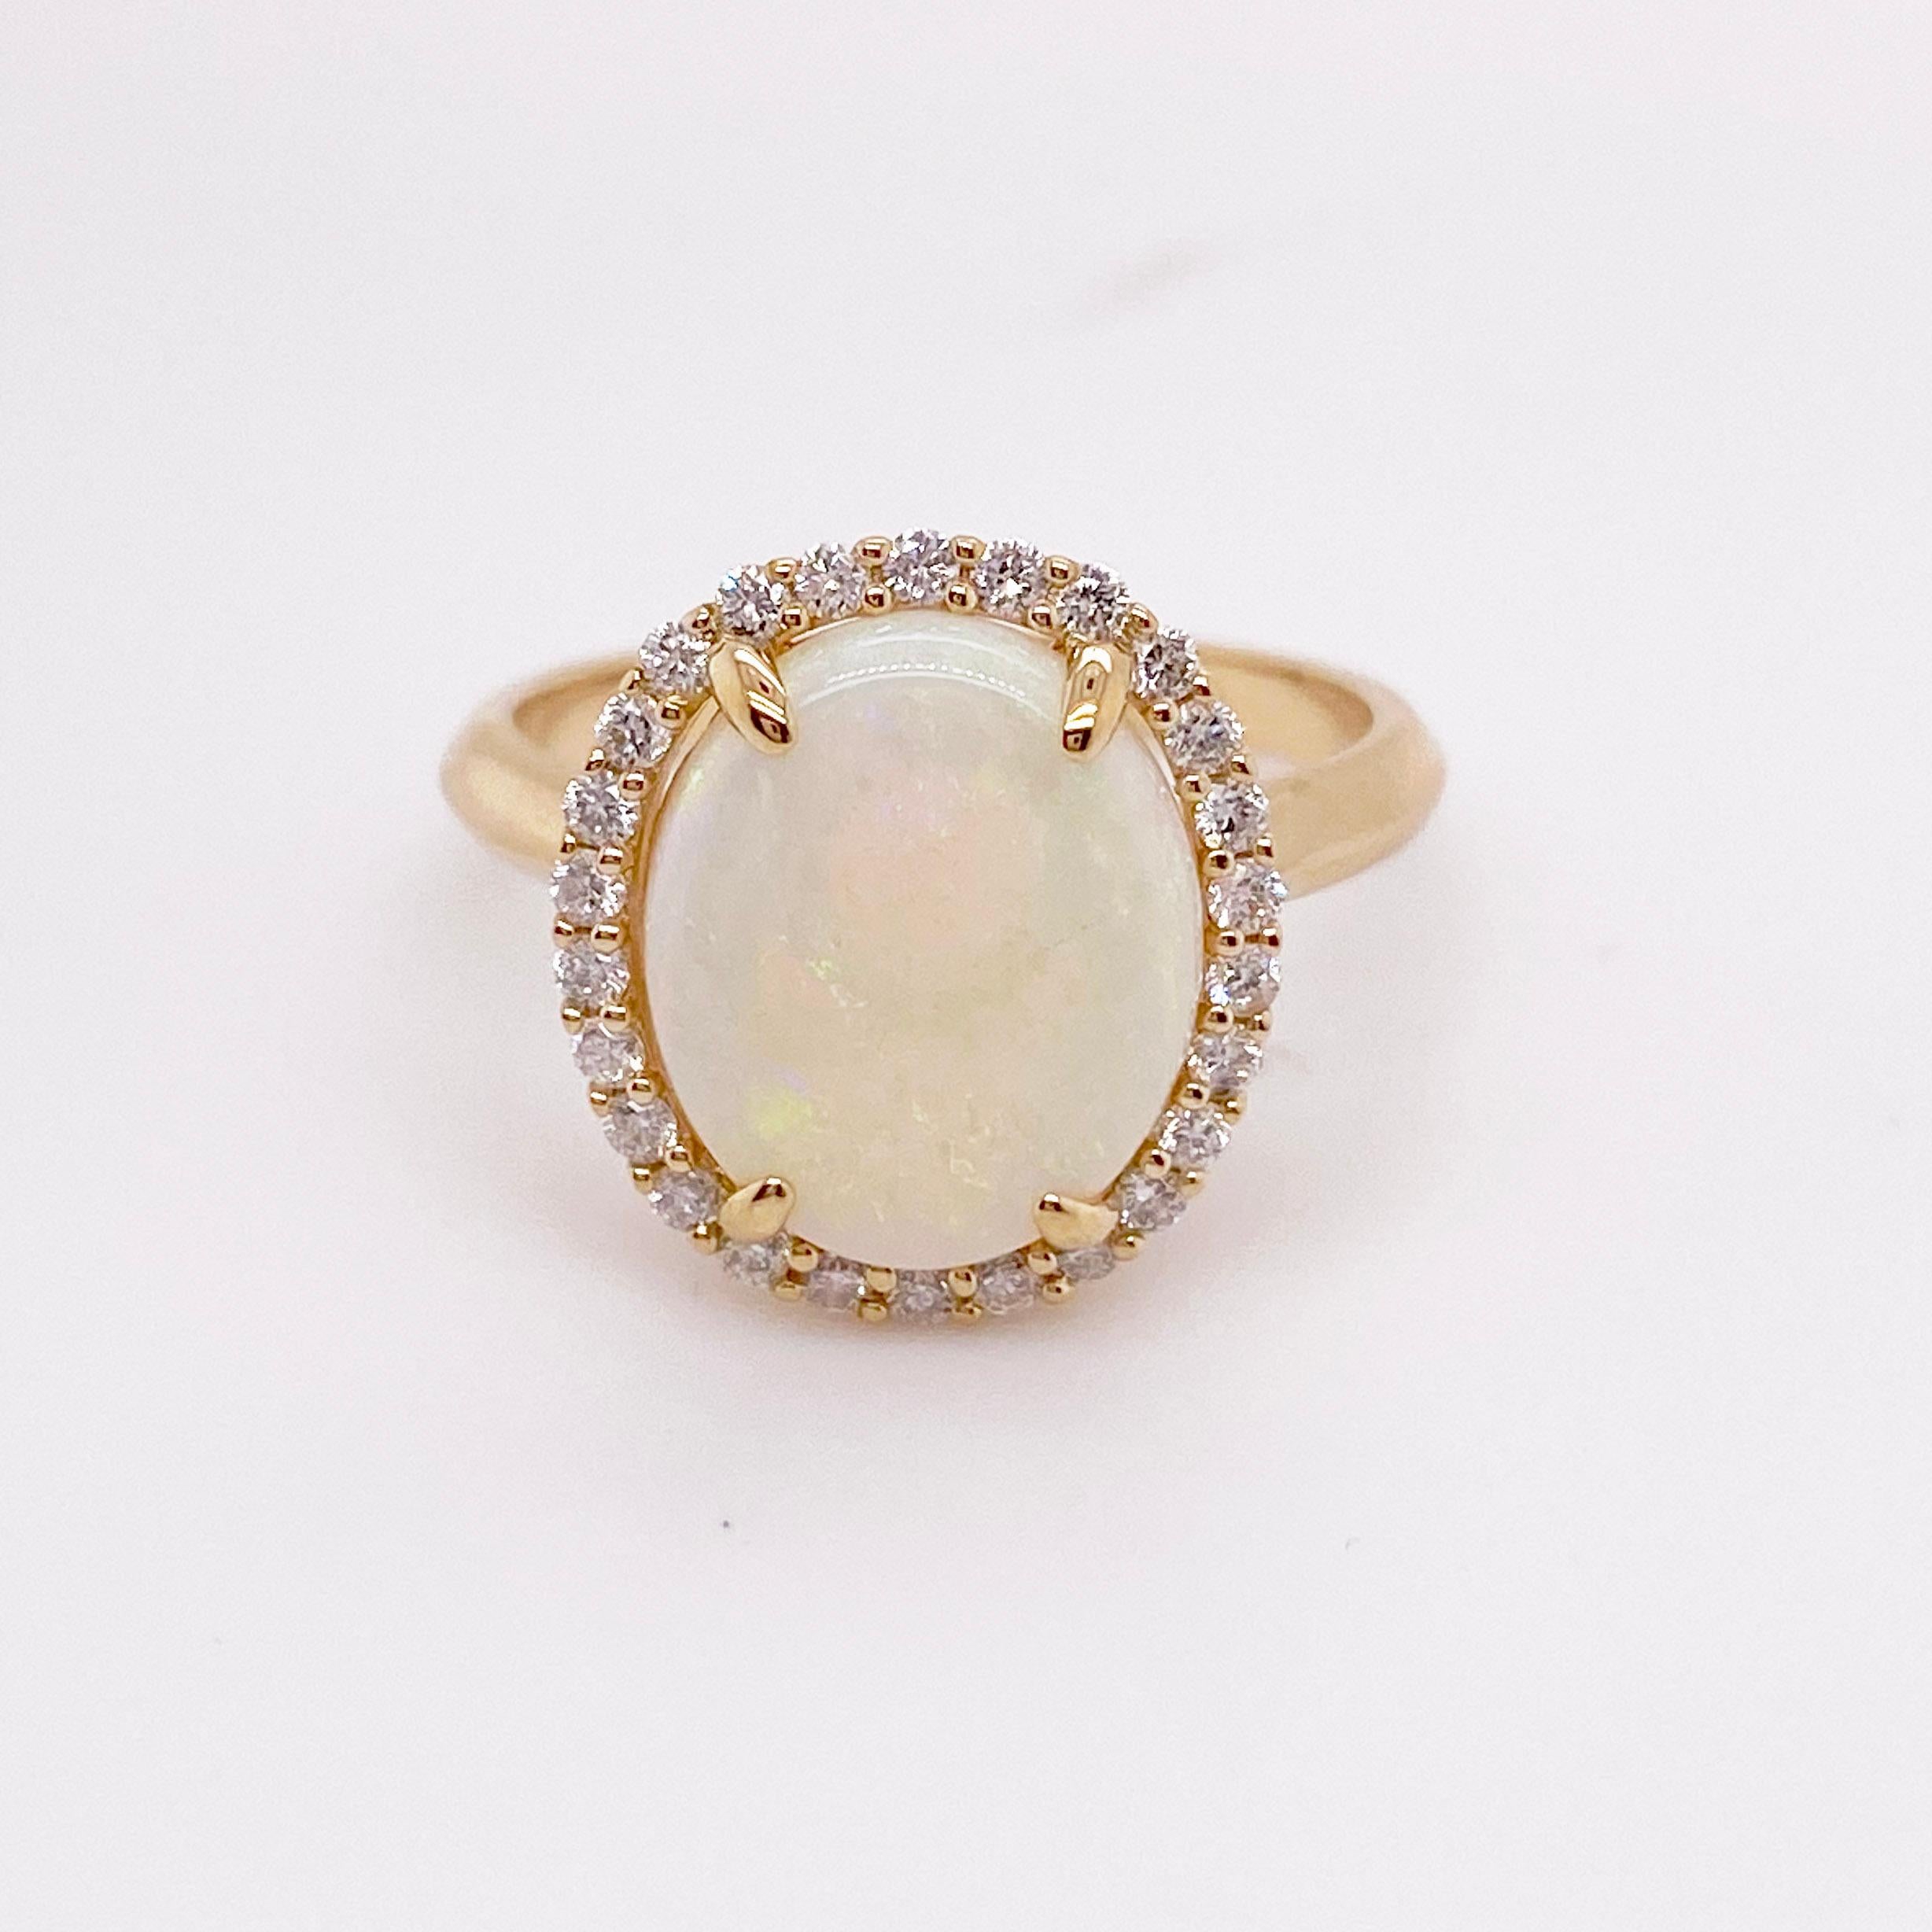 For Sale:  Opal Ring with a Diamond Halo Set 2.82 carats total weight gemstones Yellow Gold 2